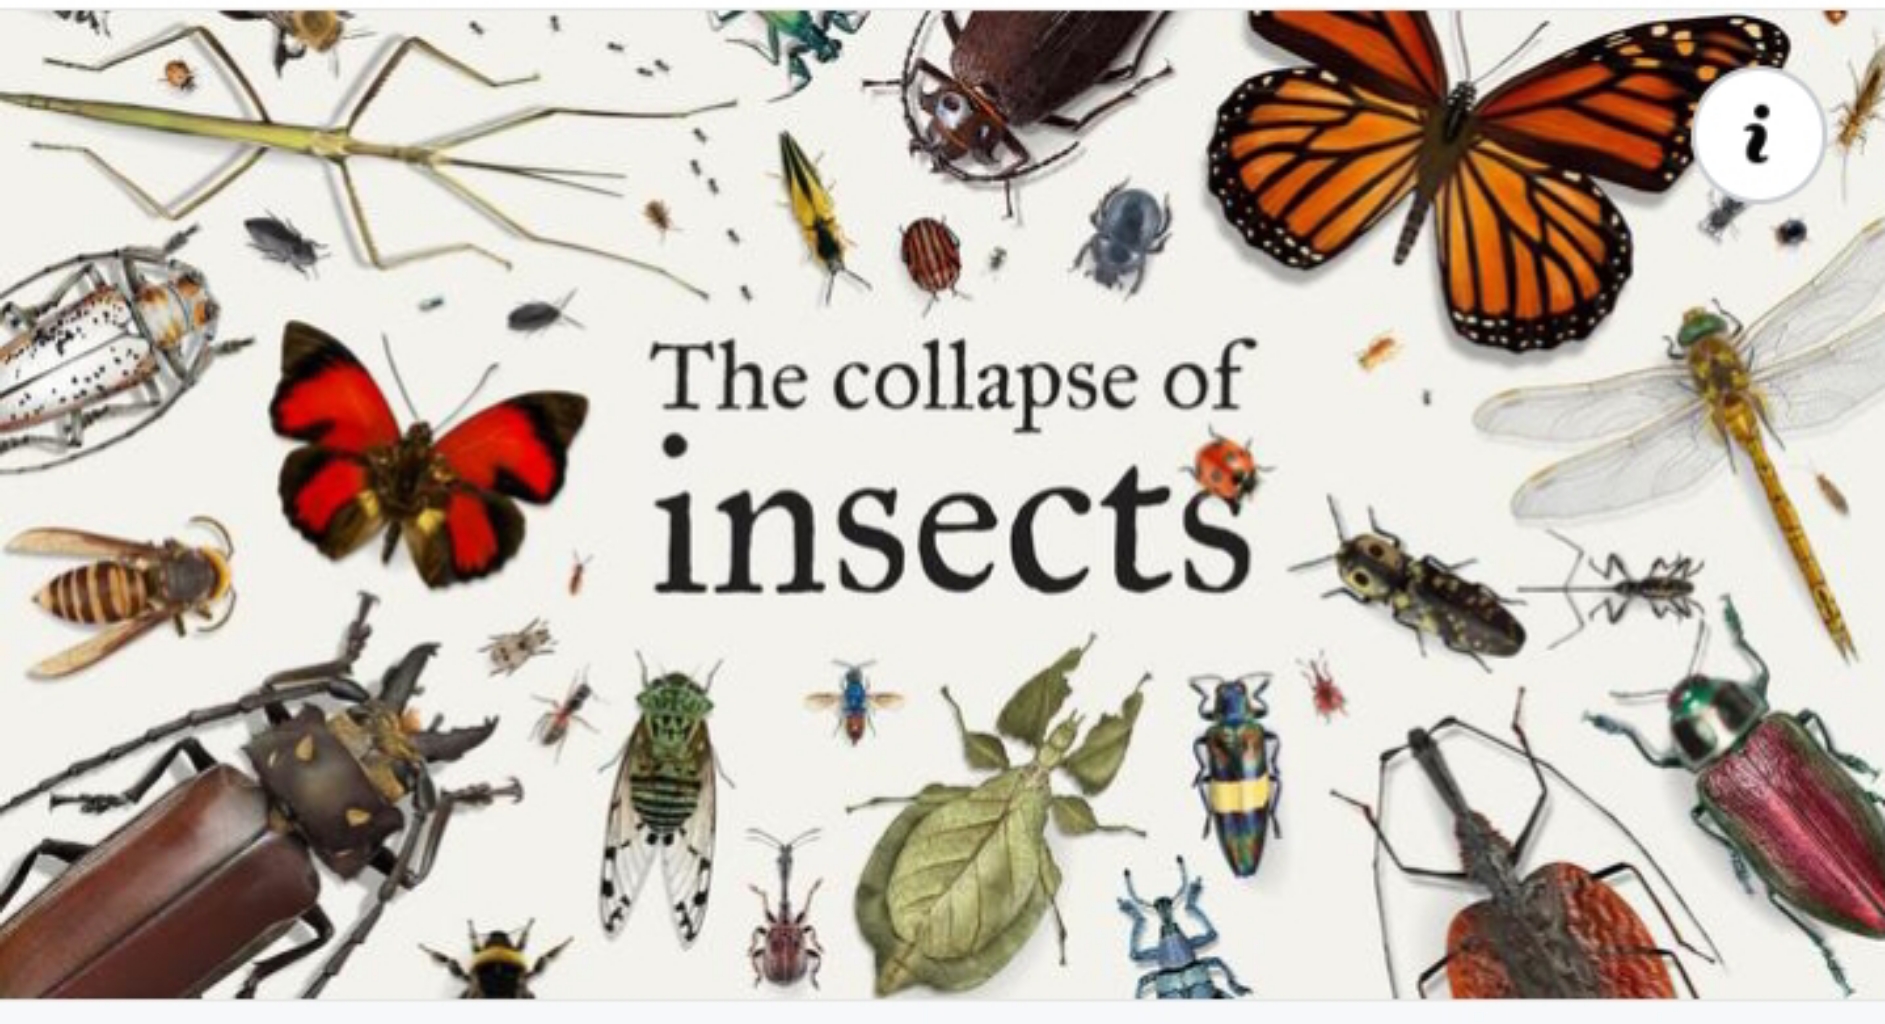 INSECTS AT THE BRINK OF EXTINCTION